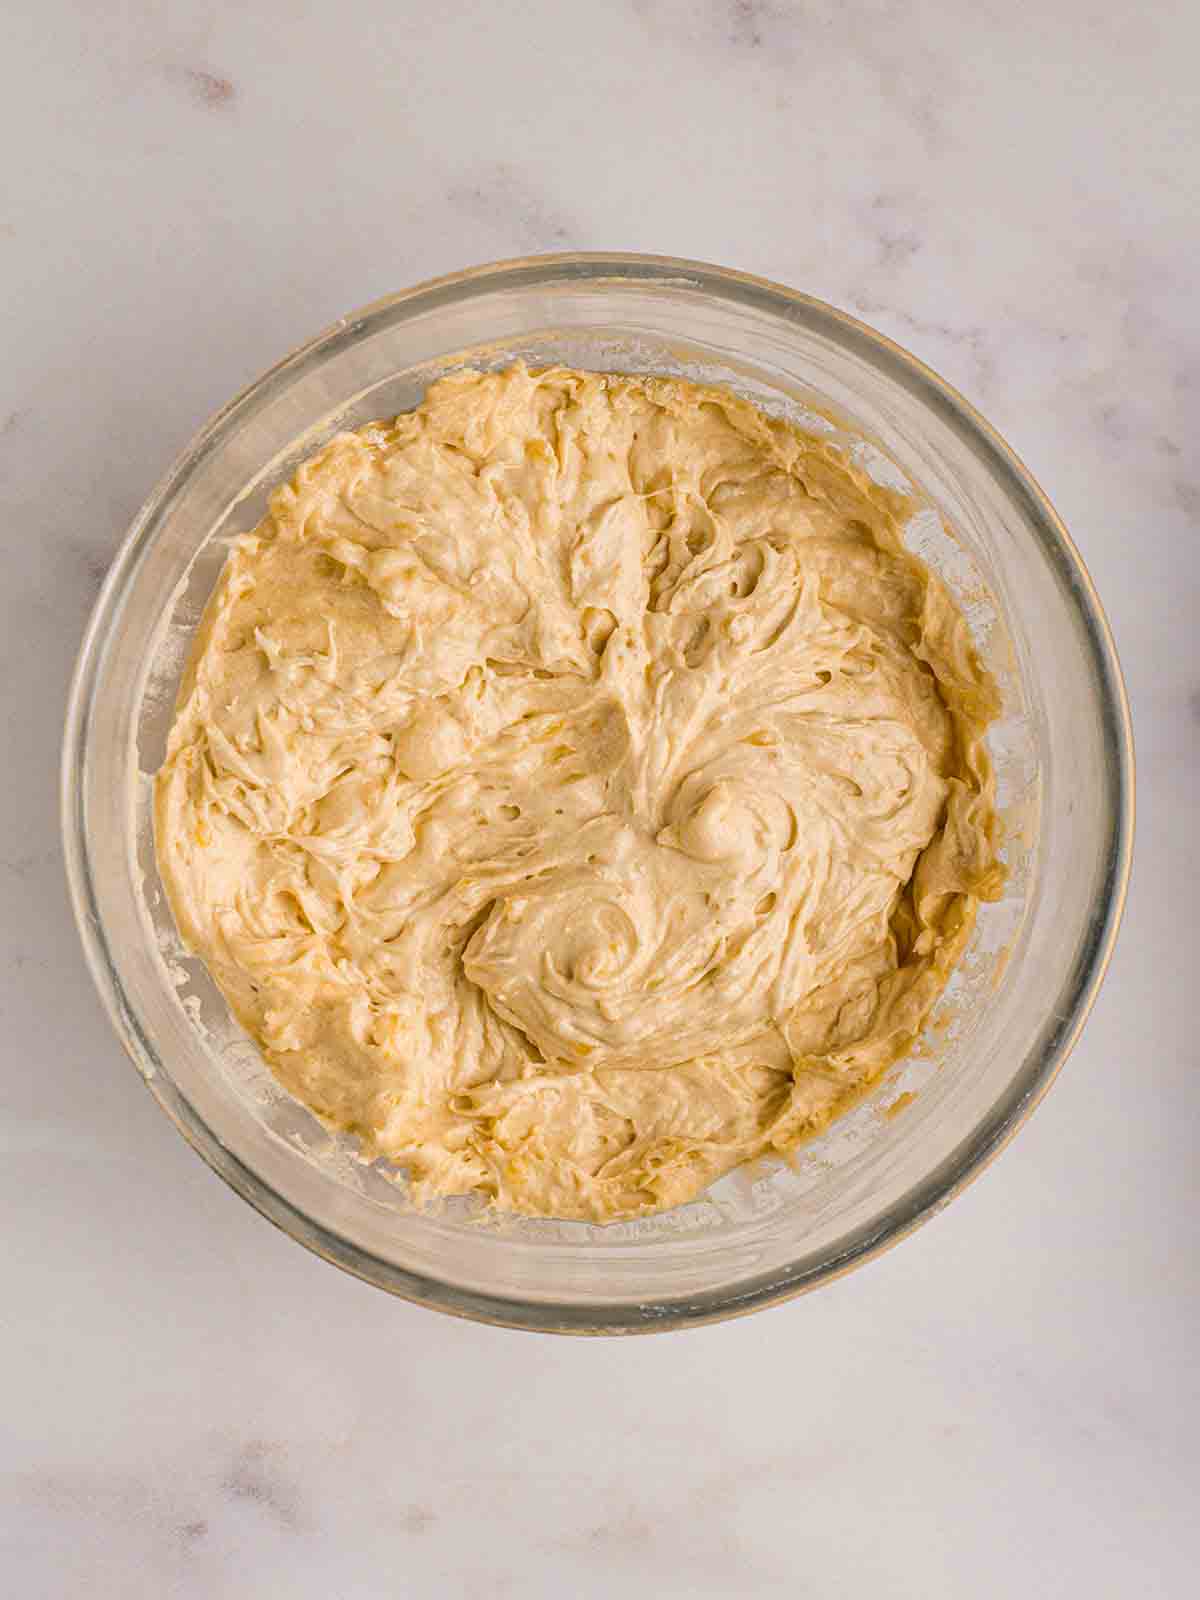 A glass bowl filled with cake mixture for step 2 in the recipe for Banana Cake.